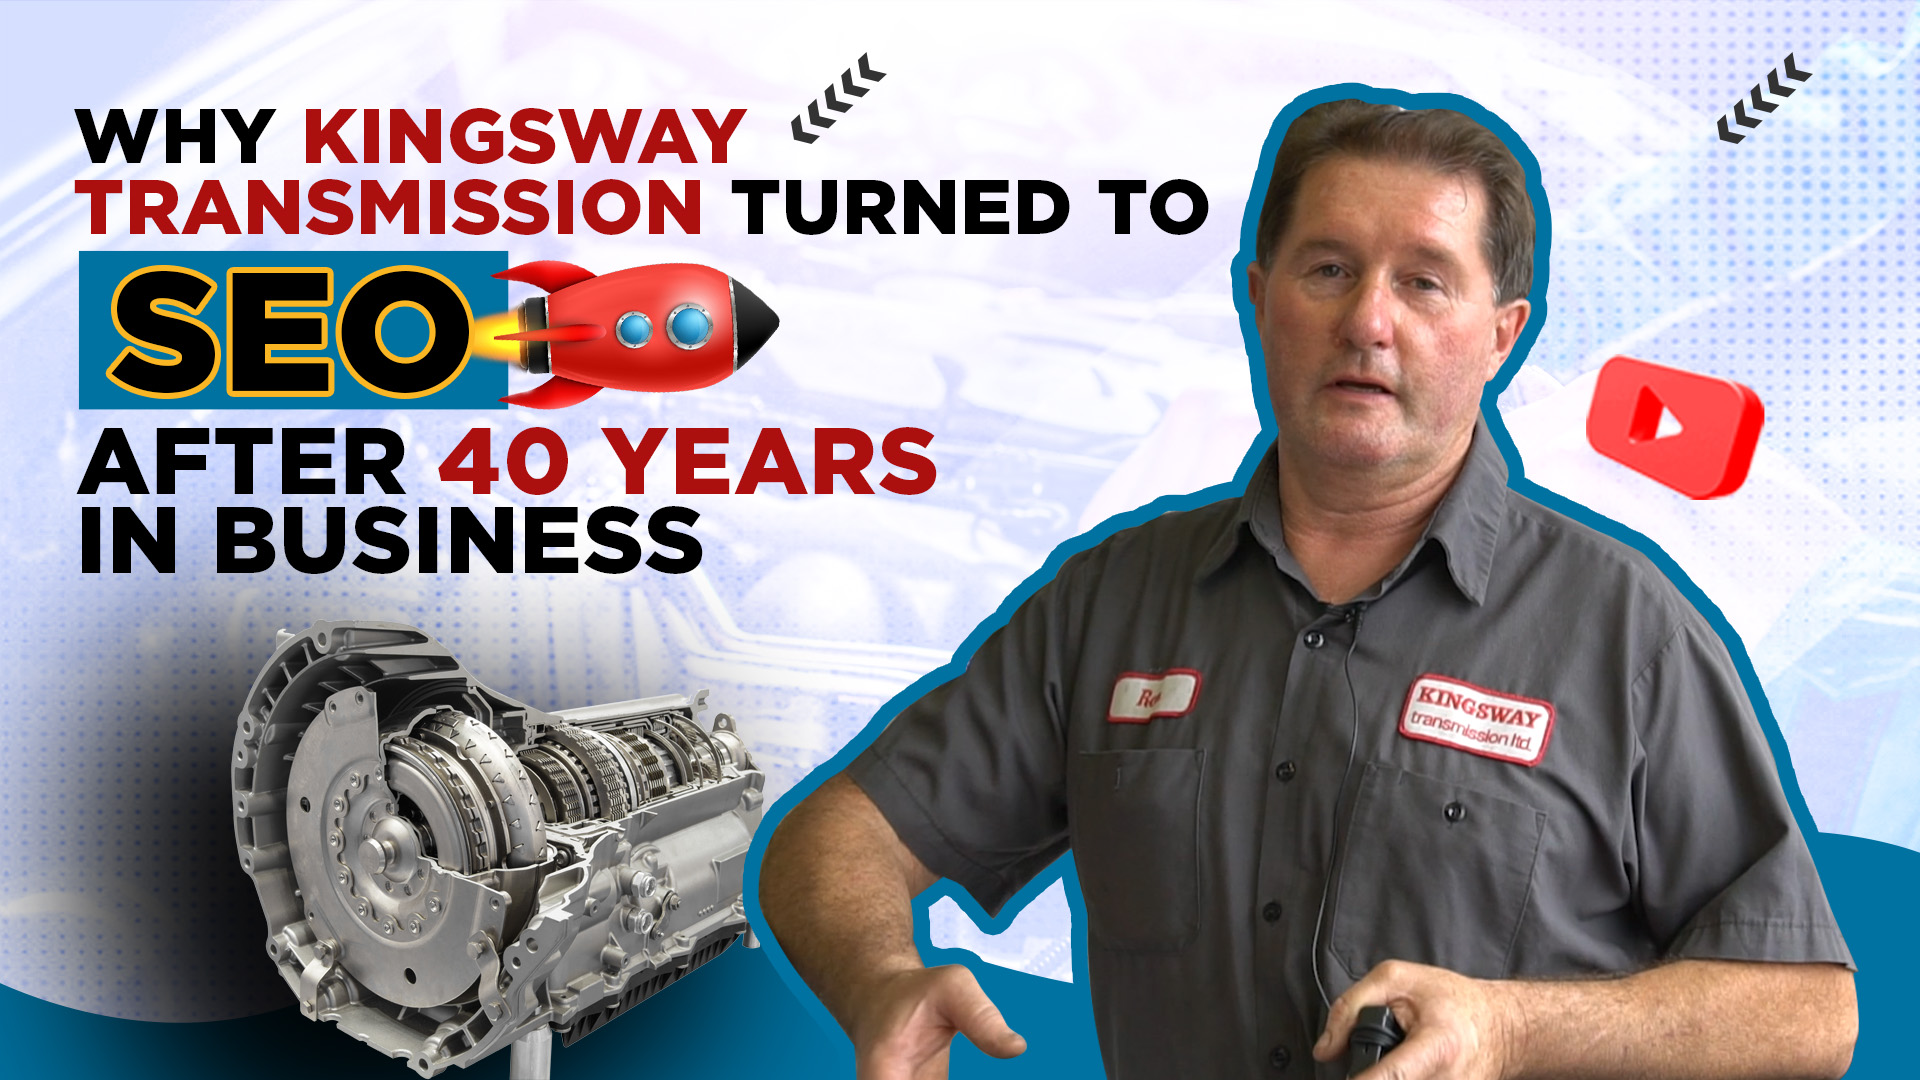 Why KingsWay Transmission Turned to SEO After 40 Years in Business